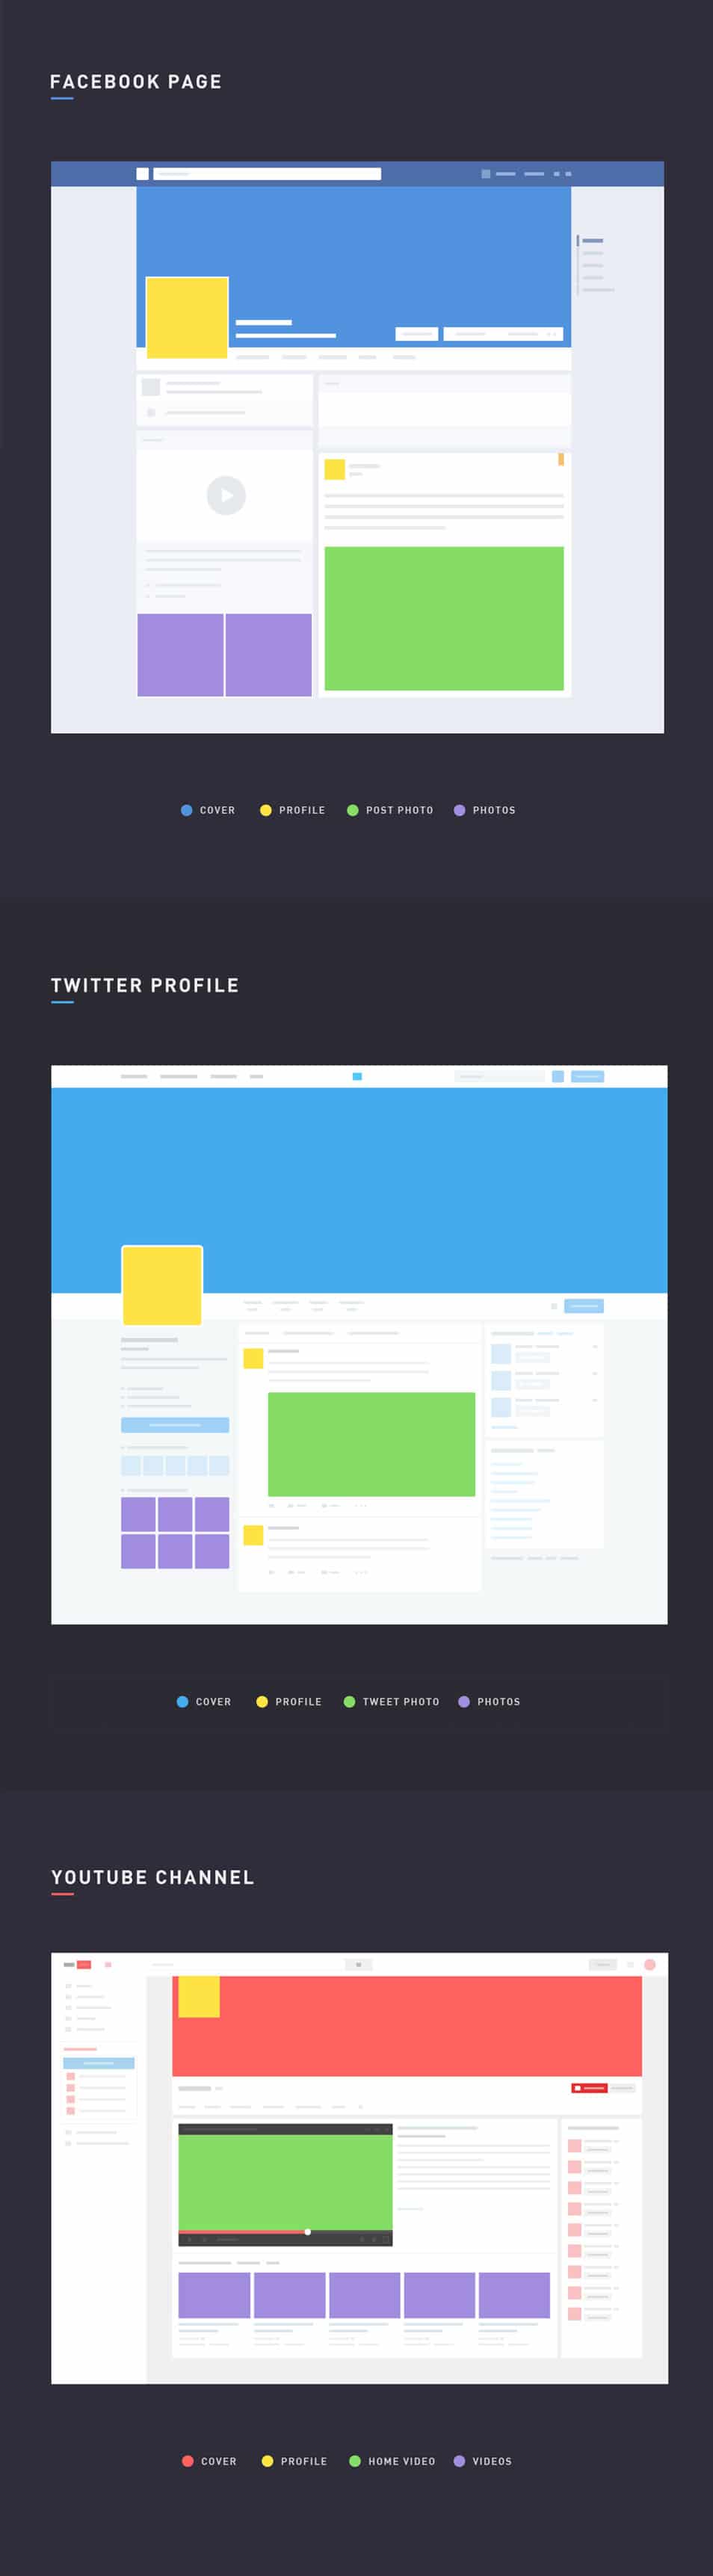 Free Facebook-Twitter and Youtube Social Media Mockups